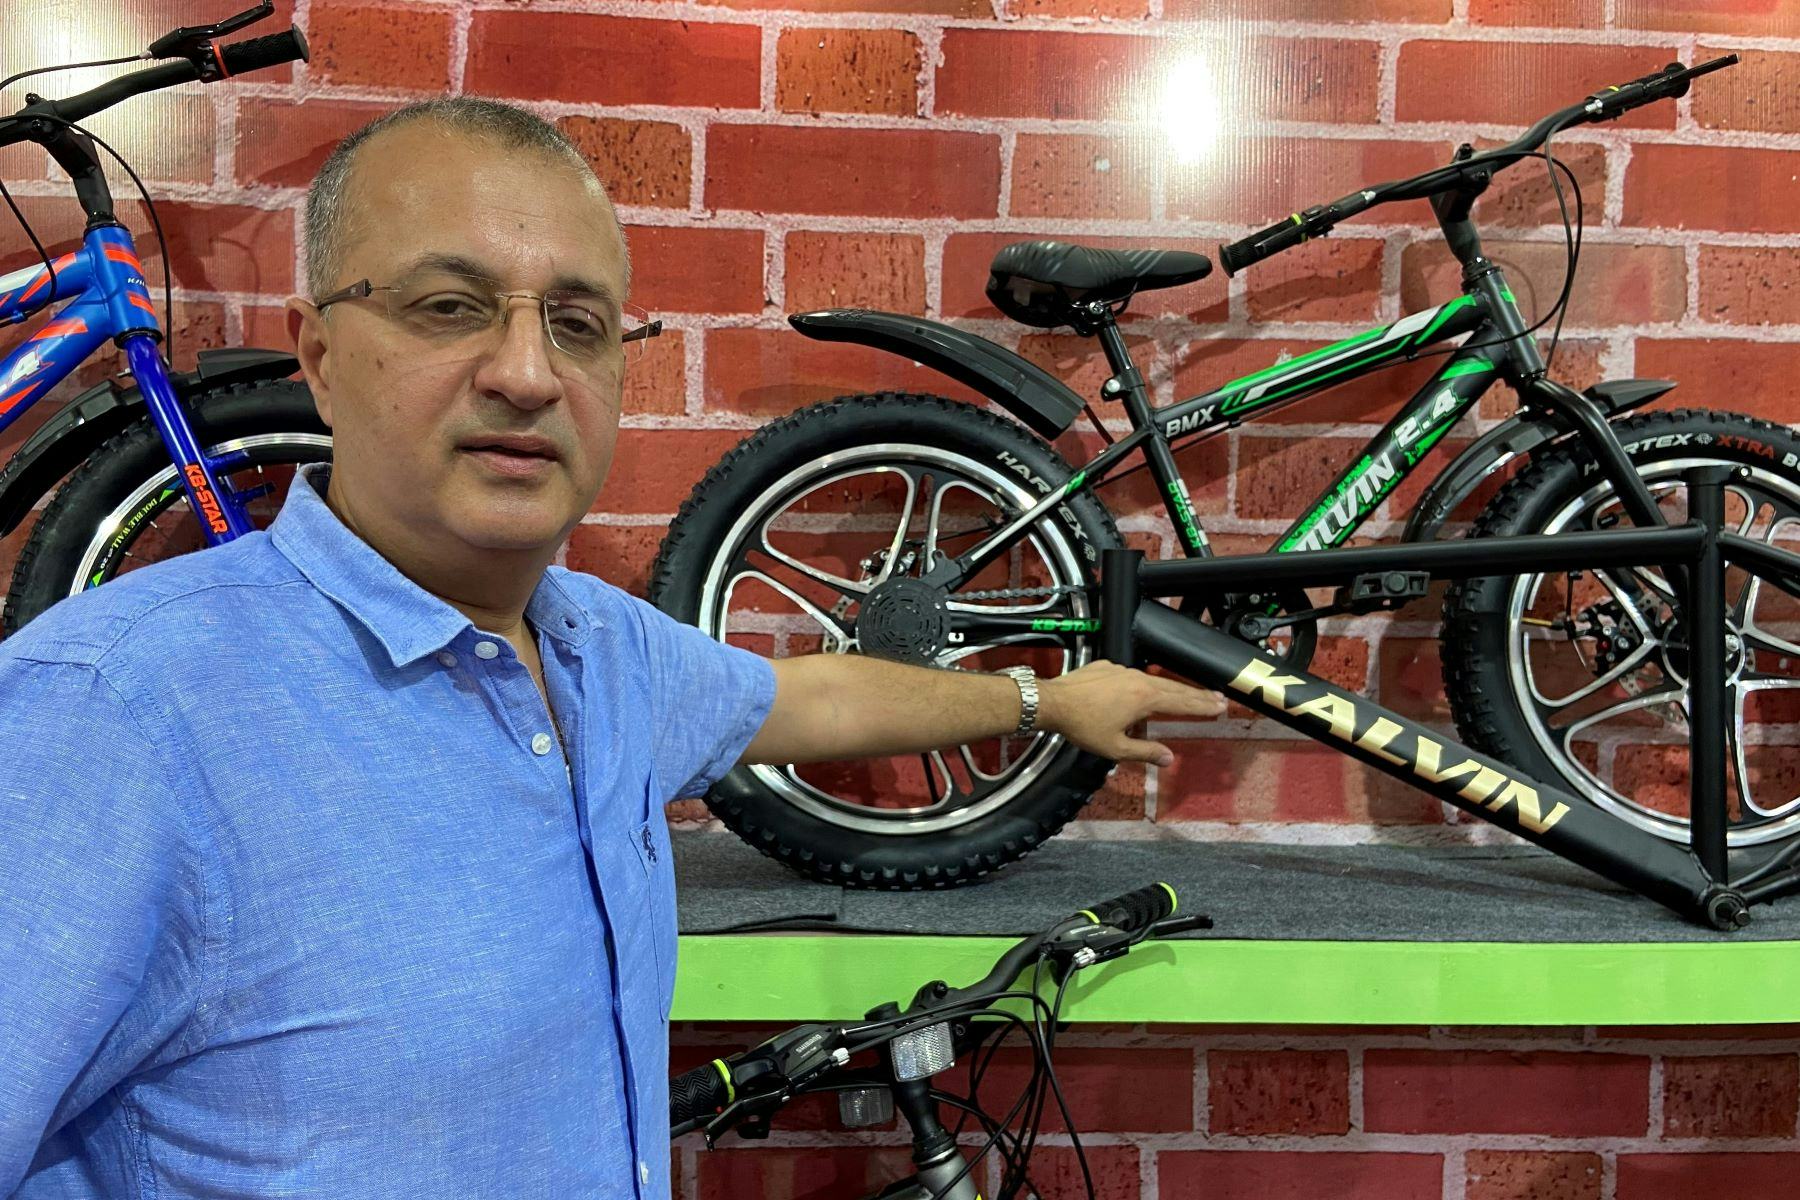 “We are making plans to increase our bicycle production capacity by 25% in the next fiscal year,” says Neeraj Dhanda, Managing Director, Sadem Industries. - Photo Satnam Singh 